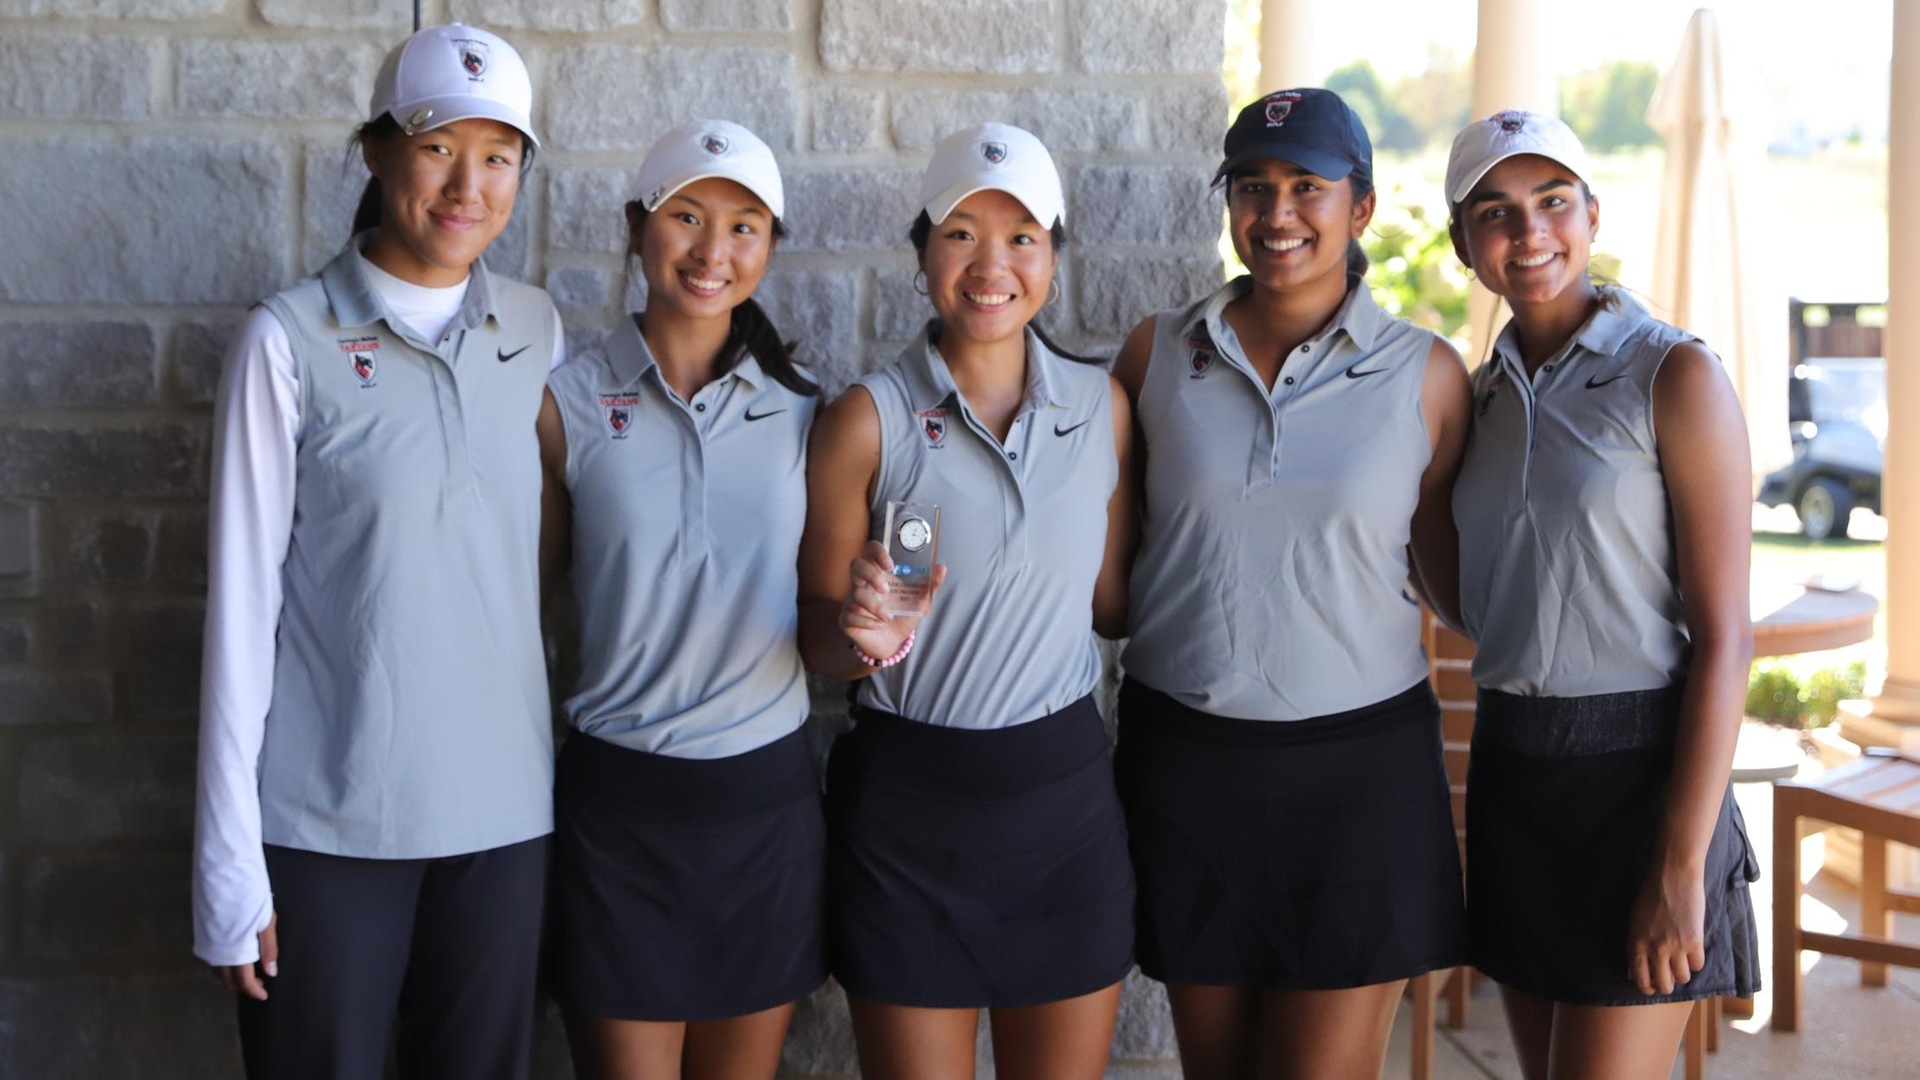 Tartans Take Top Spot at NCAA Preview, Win Second Straight Tournament